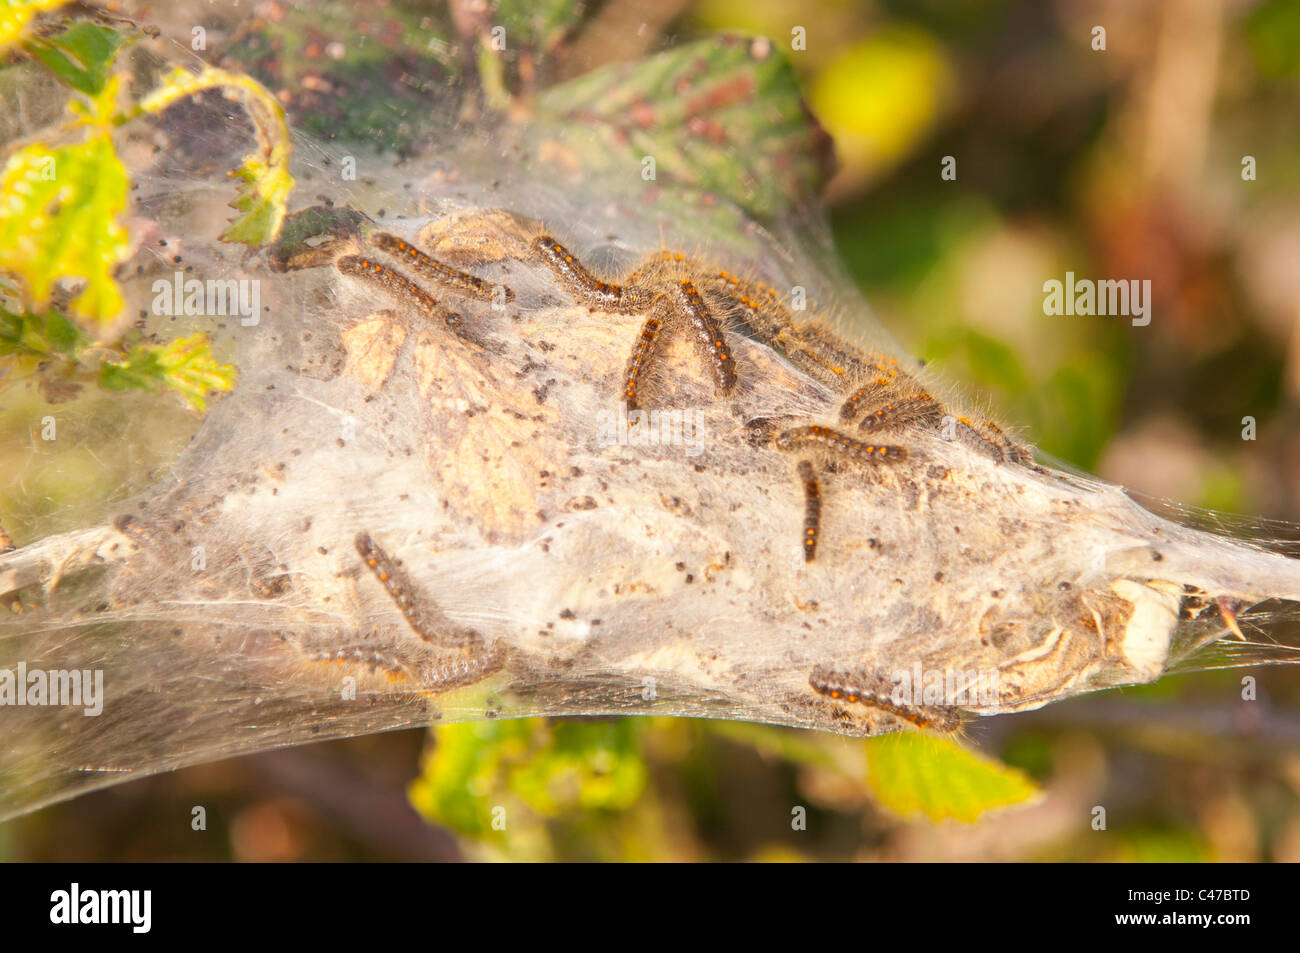 Unidentified caterpillars in a silky cocoon in the Uk Stock Photo